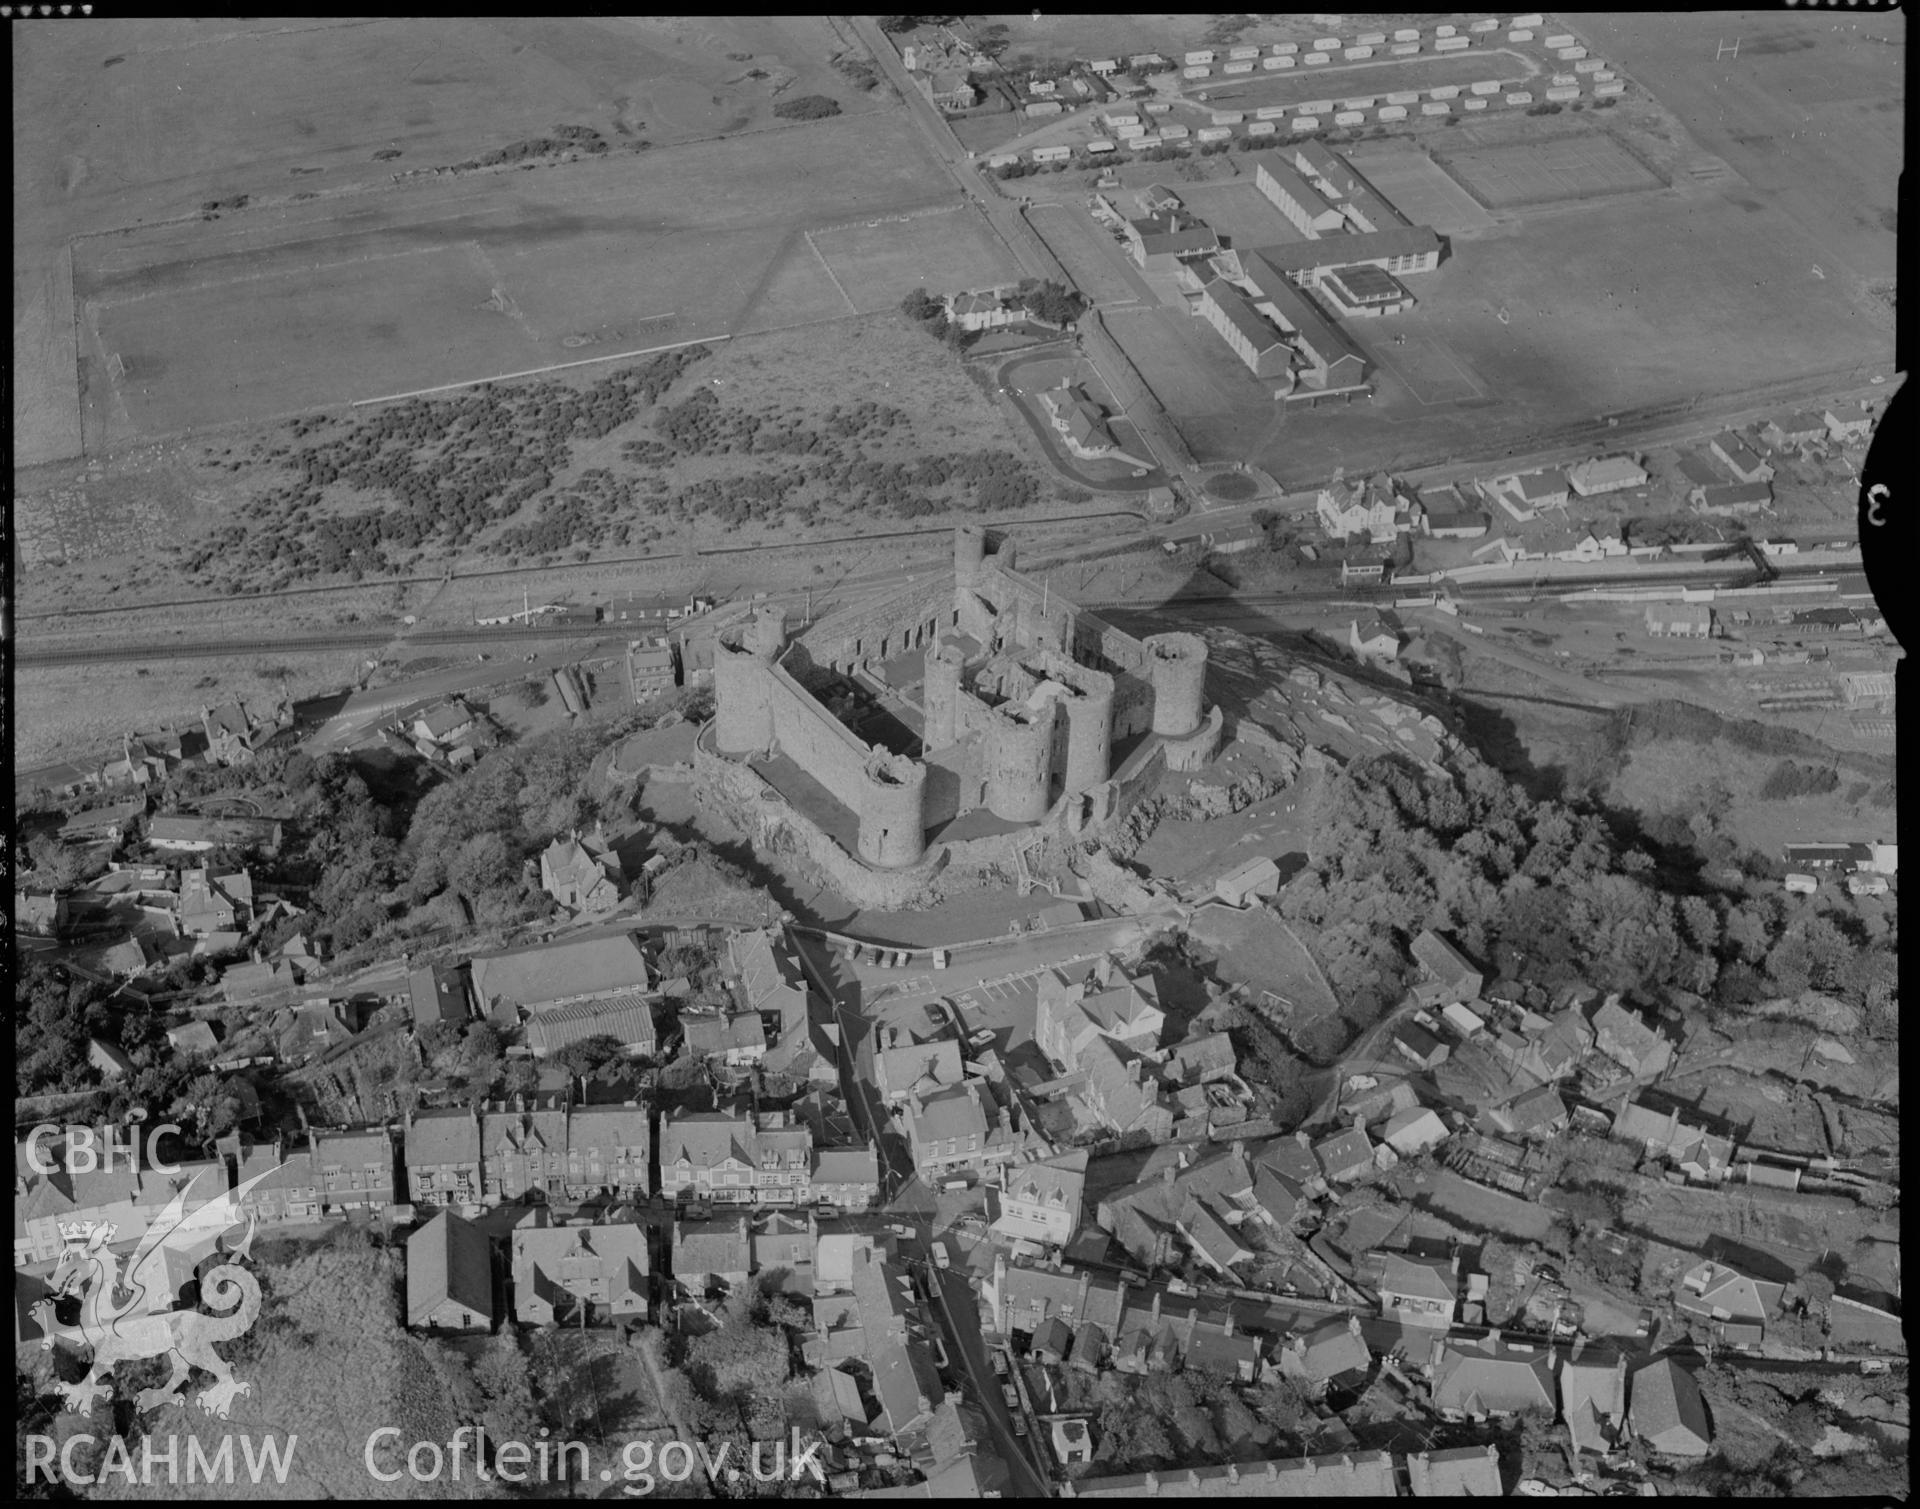 Digital copy of a black and white negative showing an aerial view of excavations at Harlech Castle.